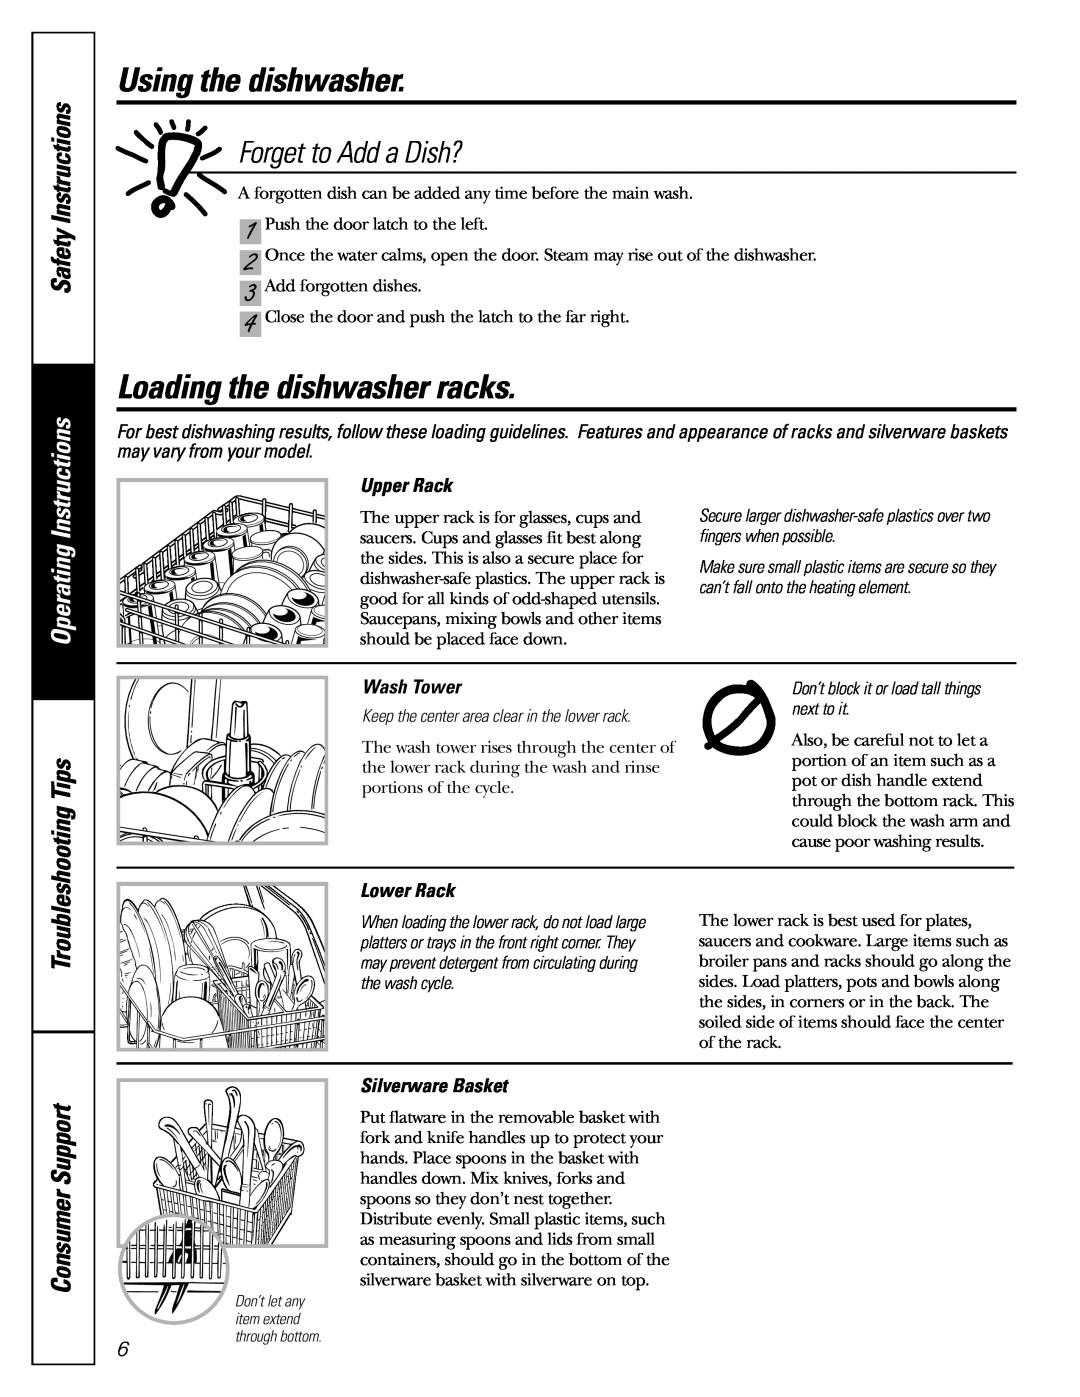 Americana Appliances ADW1000 series Loading the dishwasher racks, Forget to Add a Dish?, Instructions, Safety, Upper Rack 